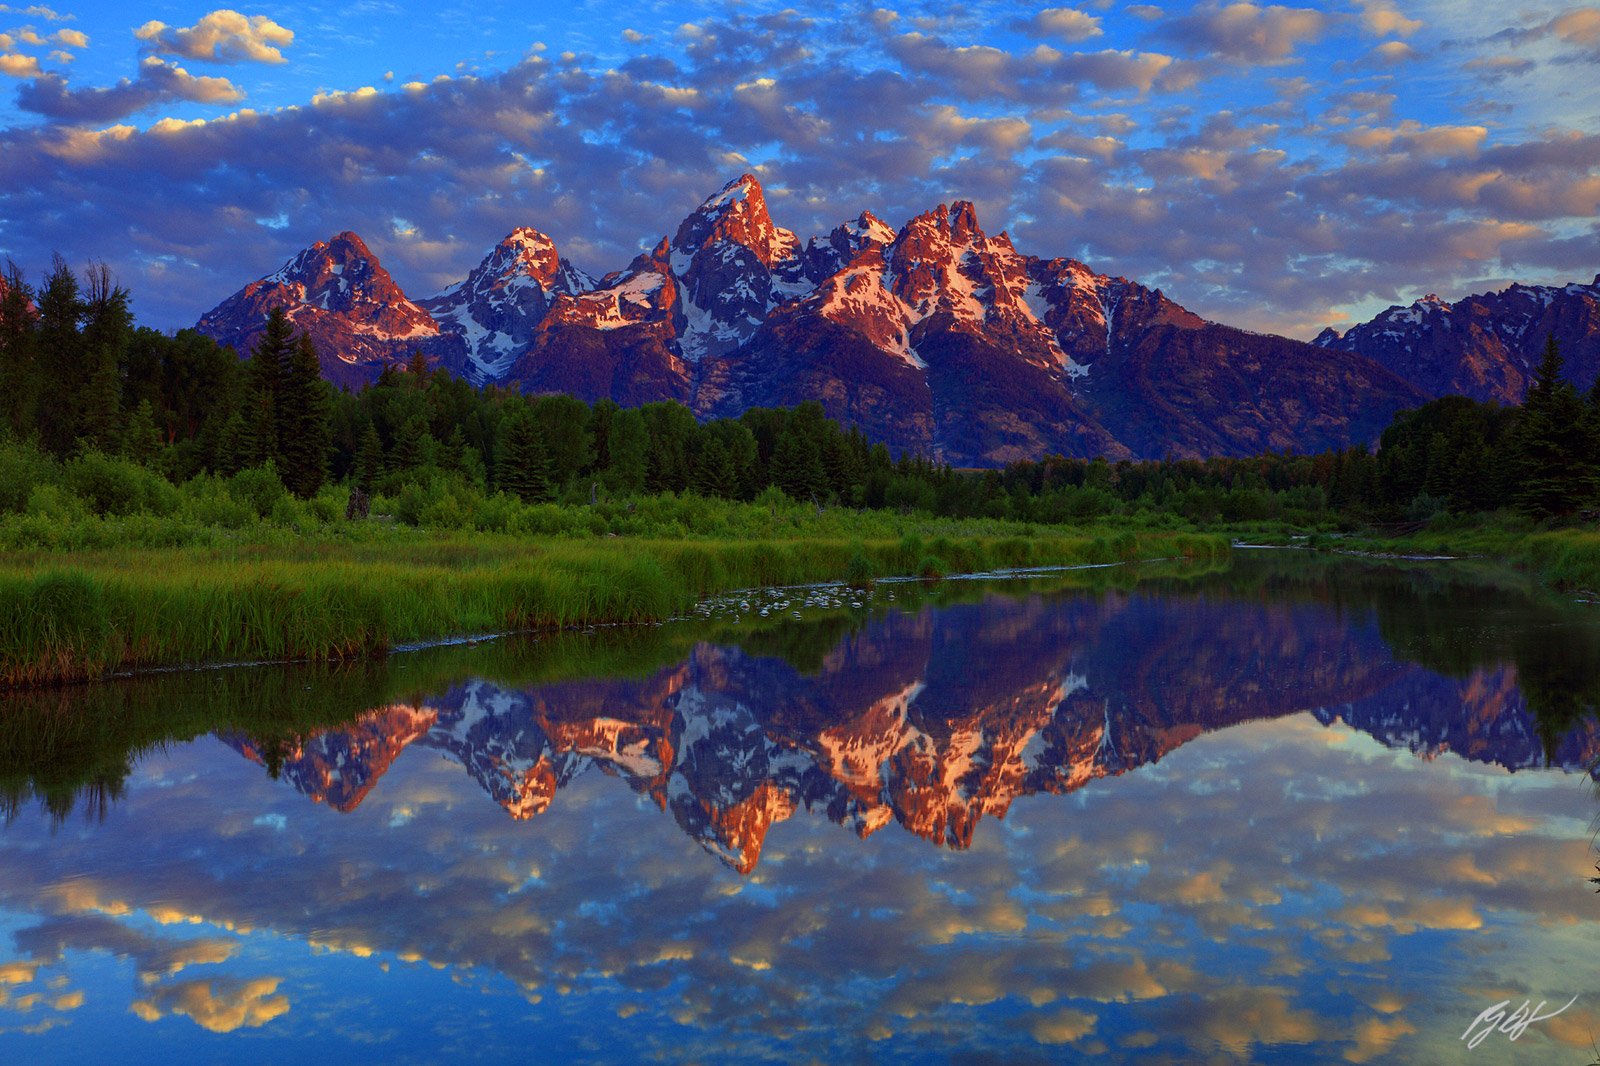 Sunrise Grand Tetons Reflected in Beaver Ponds from Grand Teton National Park in Wyoming